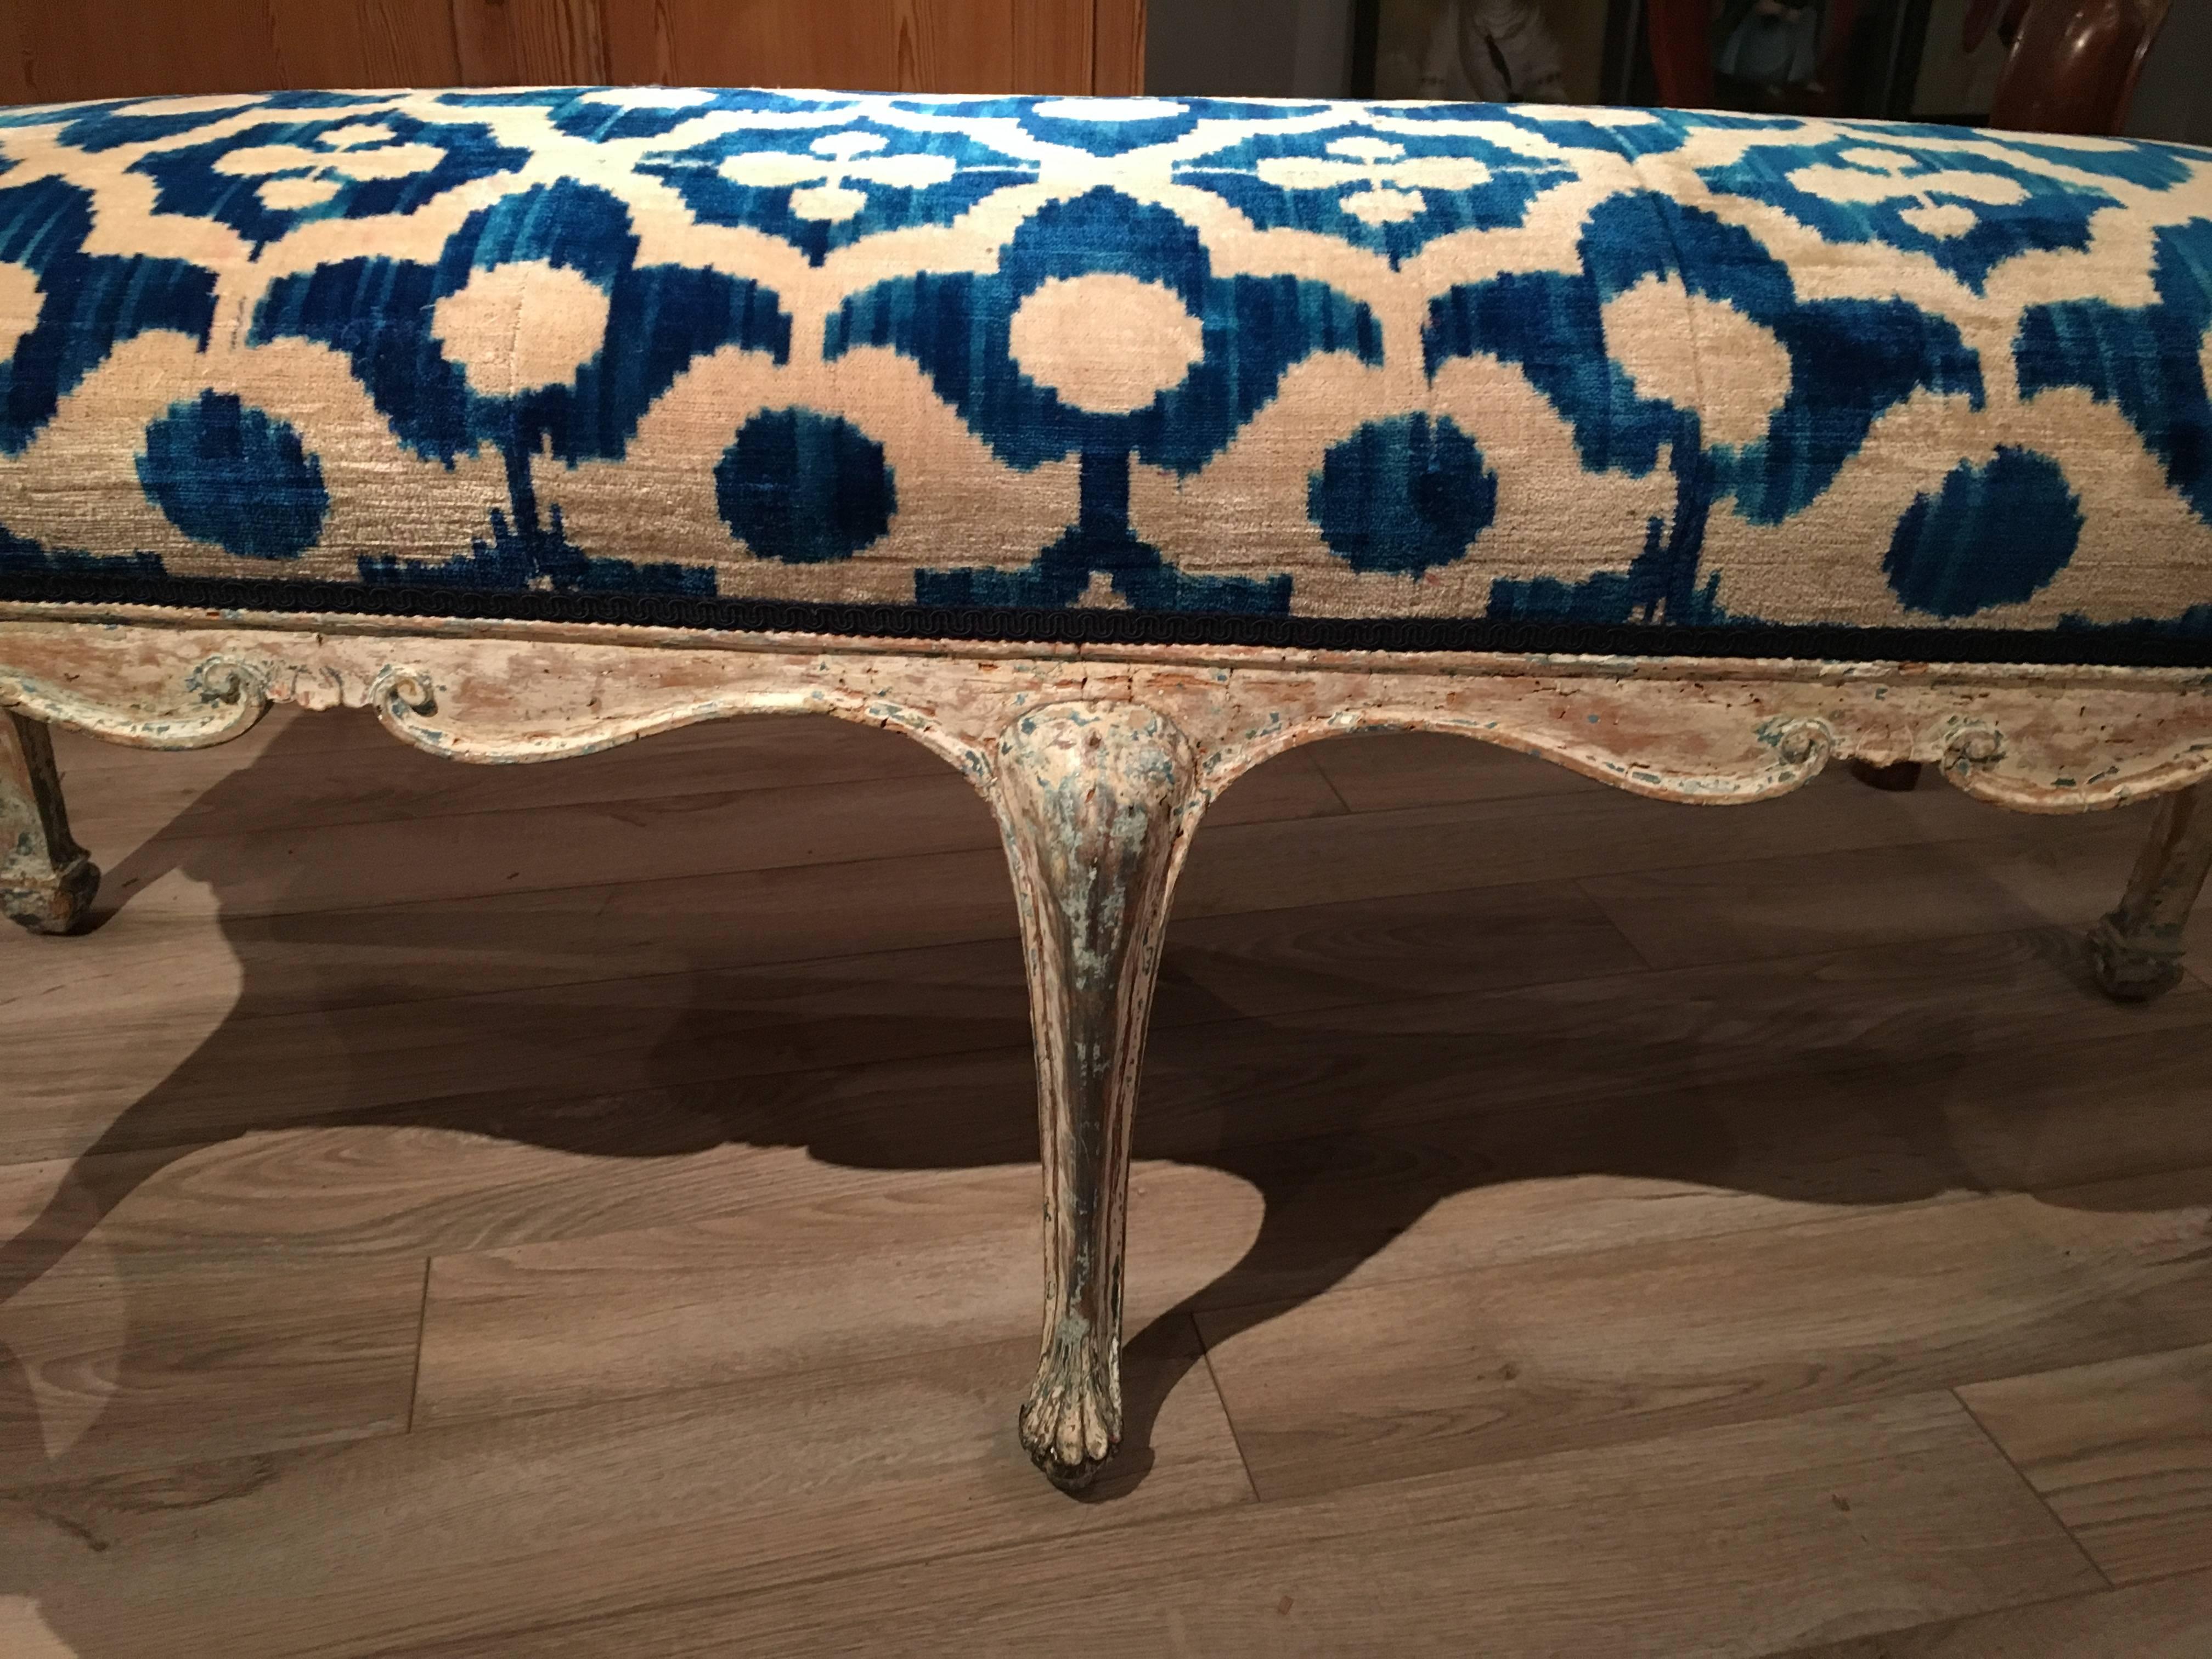 A nicely carved and sculpted Italian Louis XV style bench, late 18th century, retaining traces of its original blue and white painted finish, the frame with a carved and scalloped apron on cabriole legs, circa 1770. The bench is currently